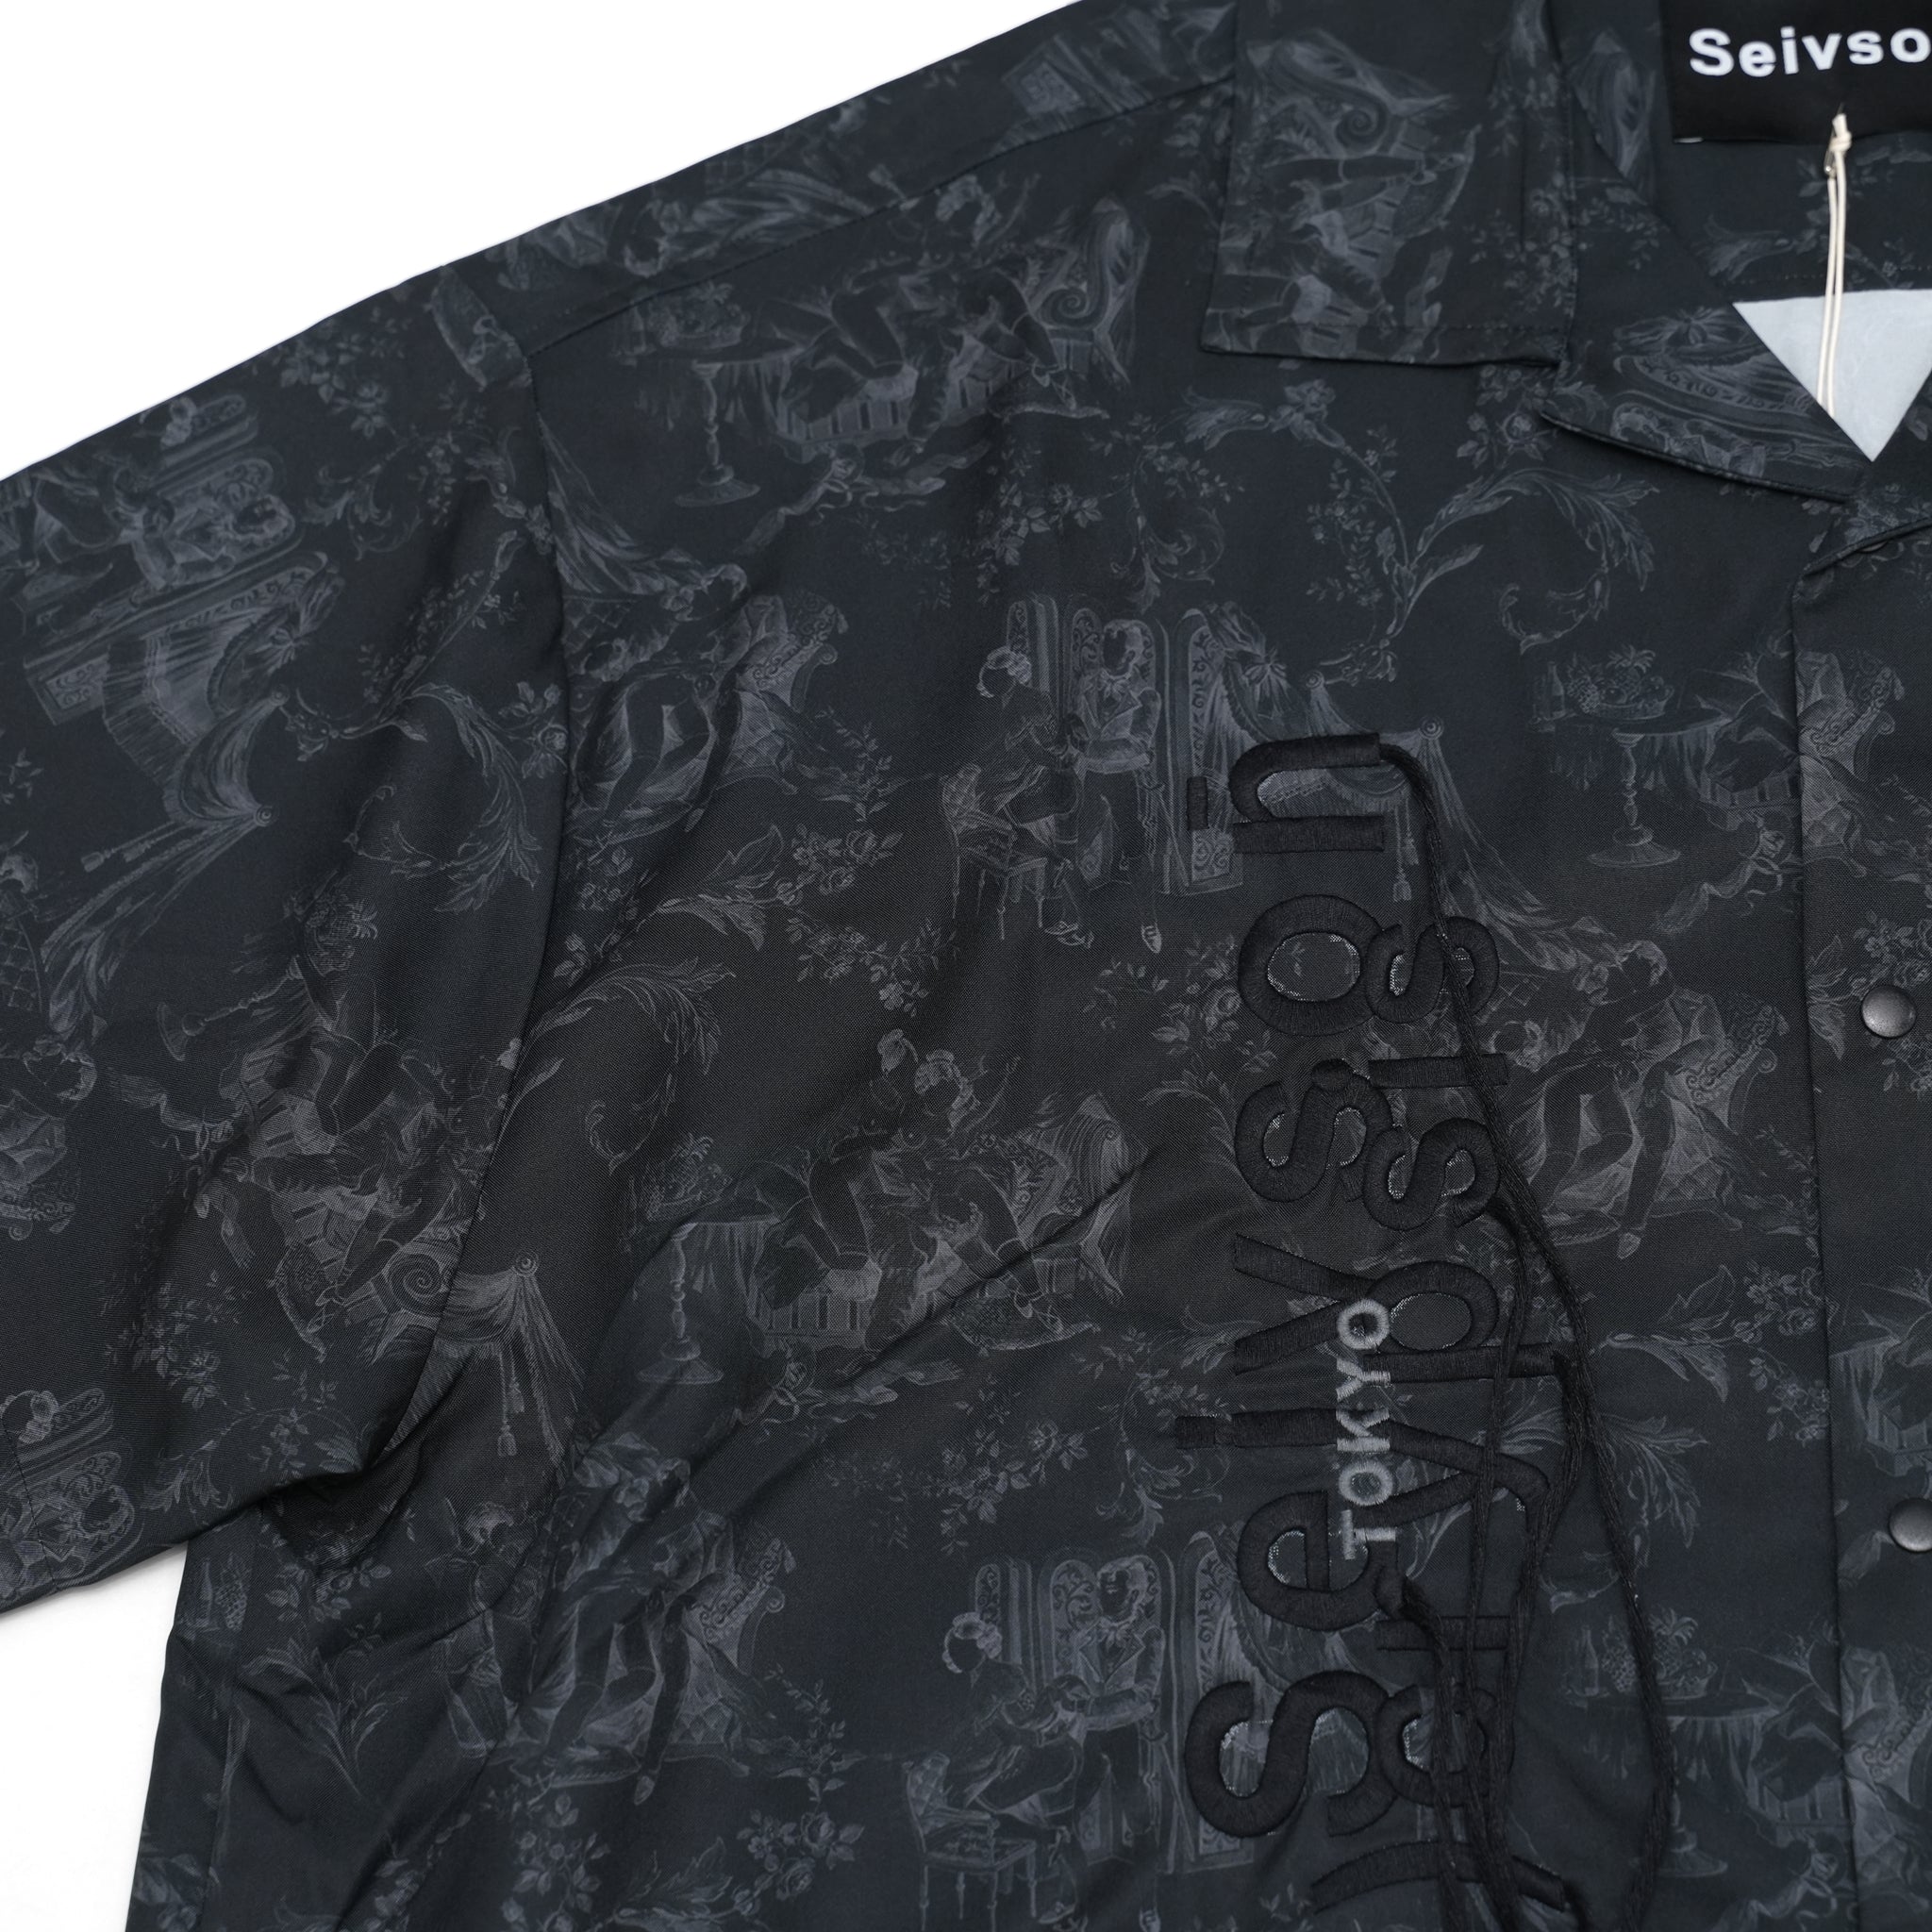 No:SNA22-SP-S01 | Name:TOKYO FASHION WEEK LIMITED SEIVSON*ACRYPSIS SHIRTS | Col:Black【(A)crypsis_エイクライプシス】【SEIVSON_セイヴソン】